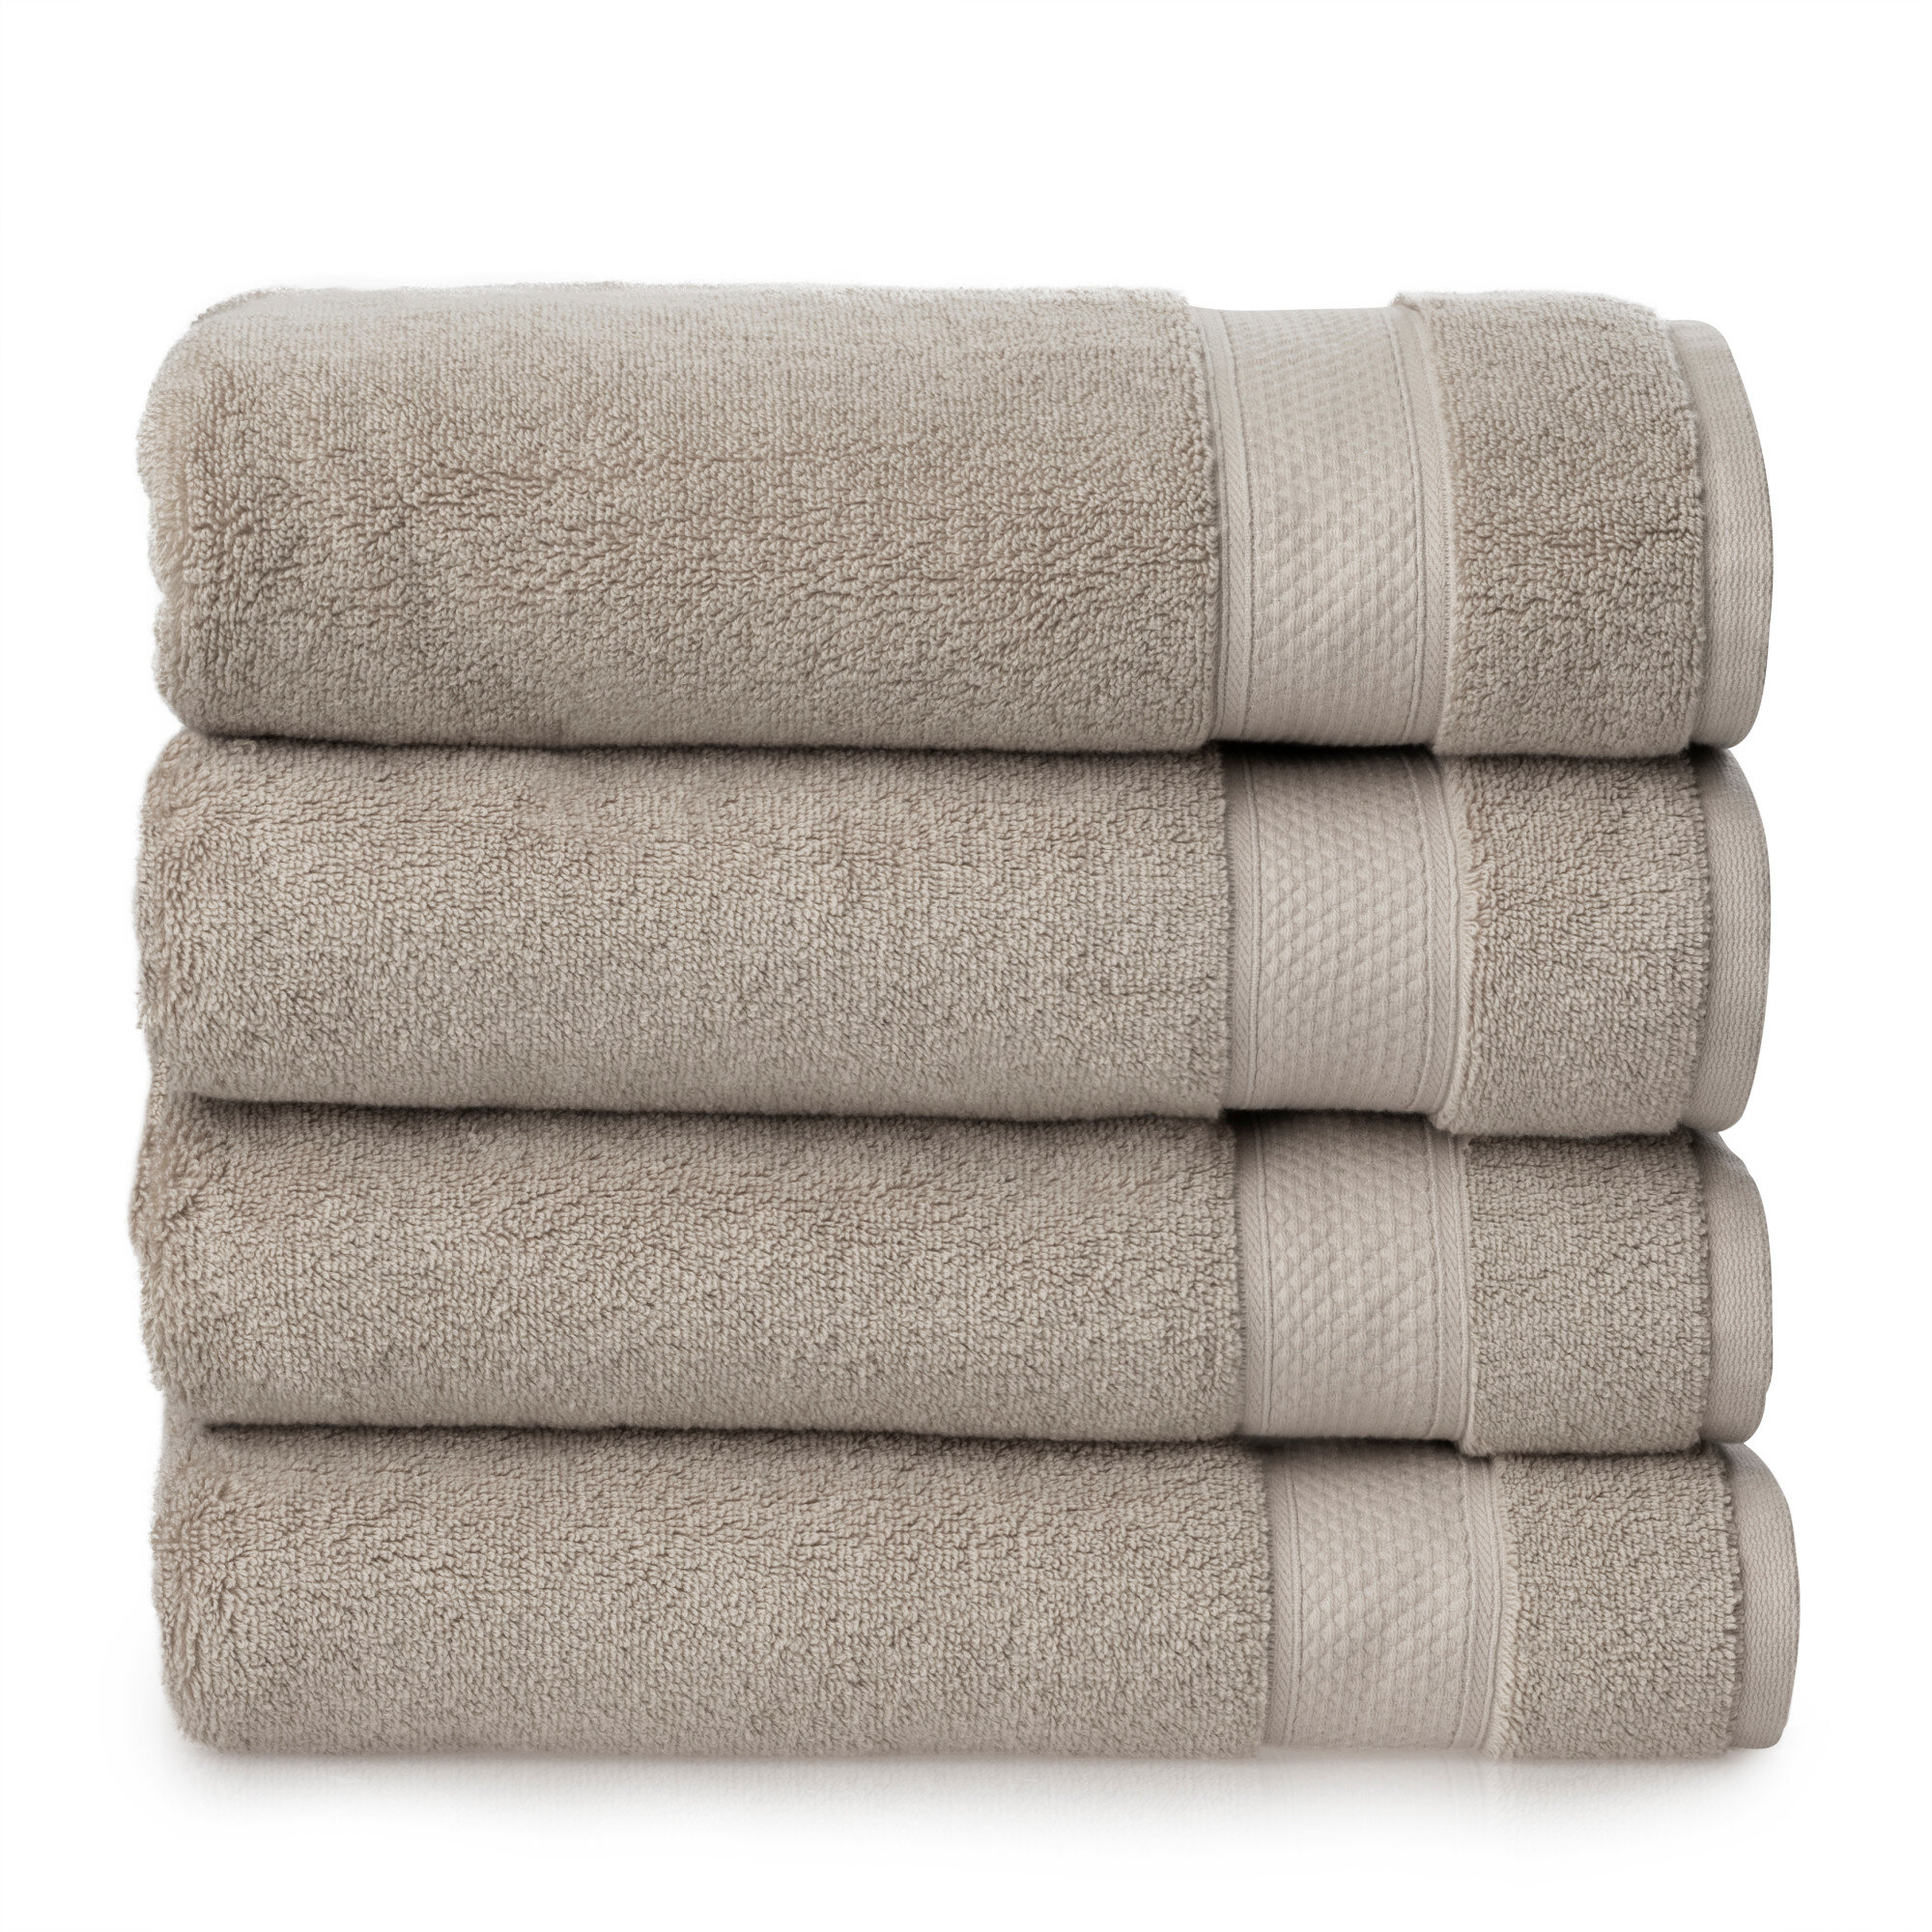 Ivory **FREE DELIVERY** EGYPTIAN COTTON 6pc BATH TOWEL SET THICK SOFT 600gsm 